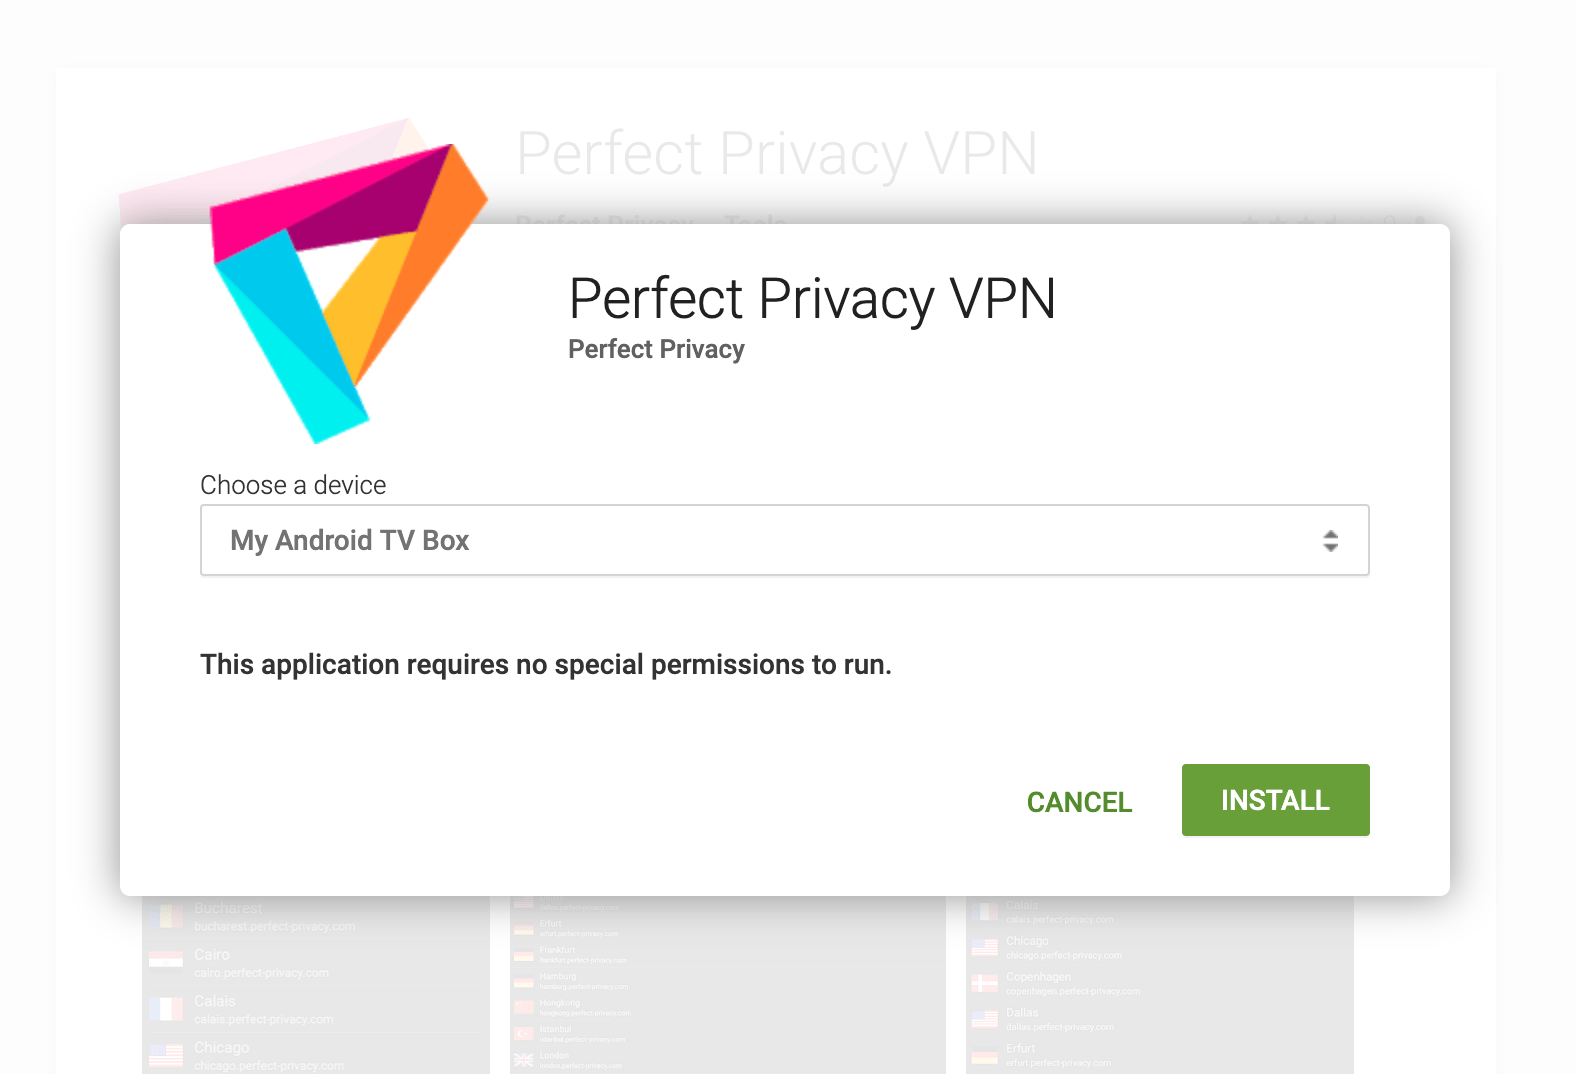 Install the Perfect Privacy VPN App on an Android TV Box | Perfect Privacy VPN on an Android TV Box (IPsec/IKEv2)